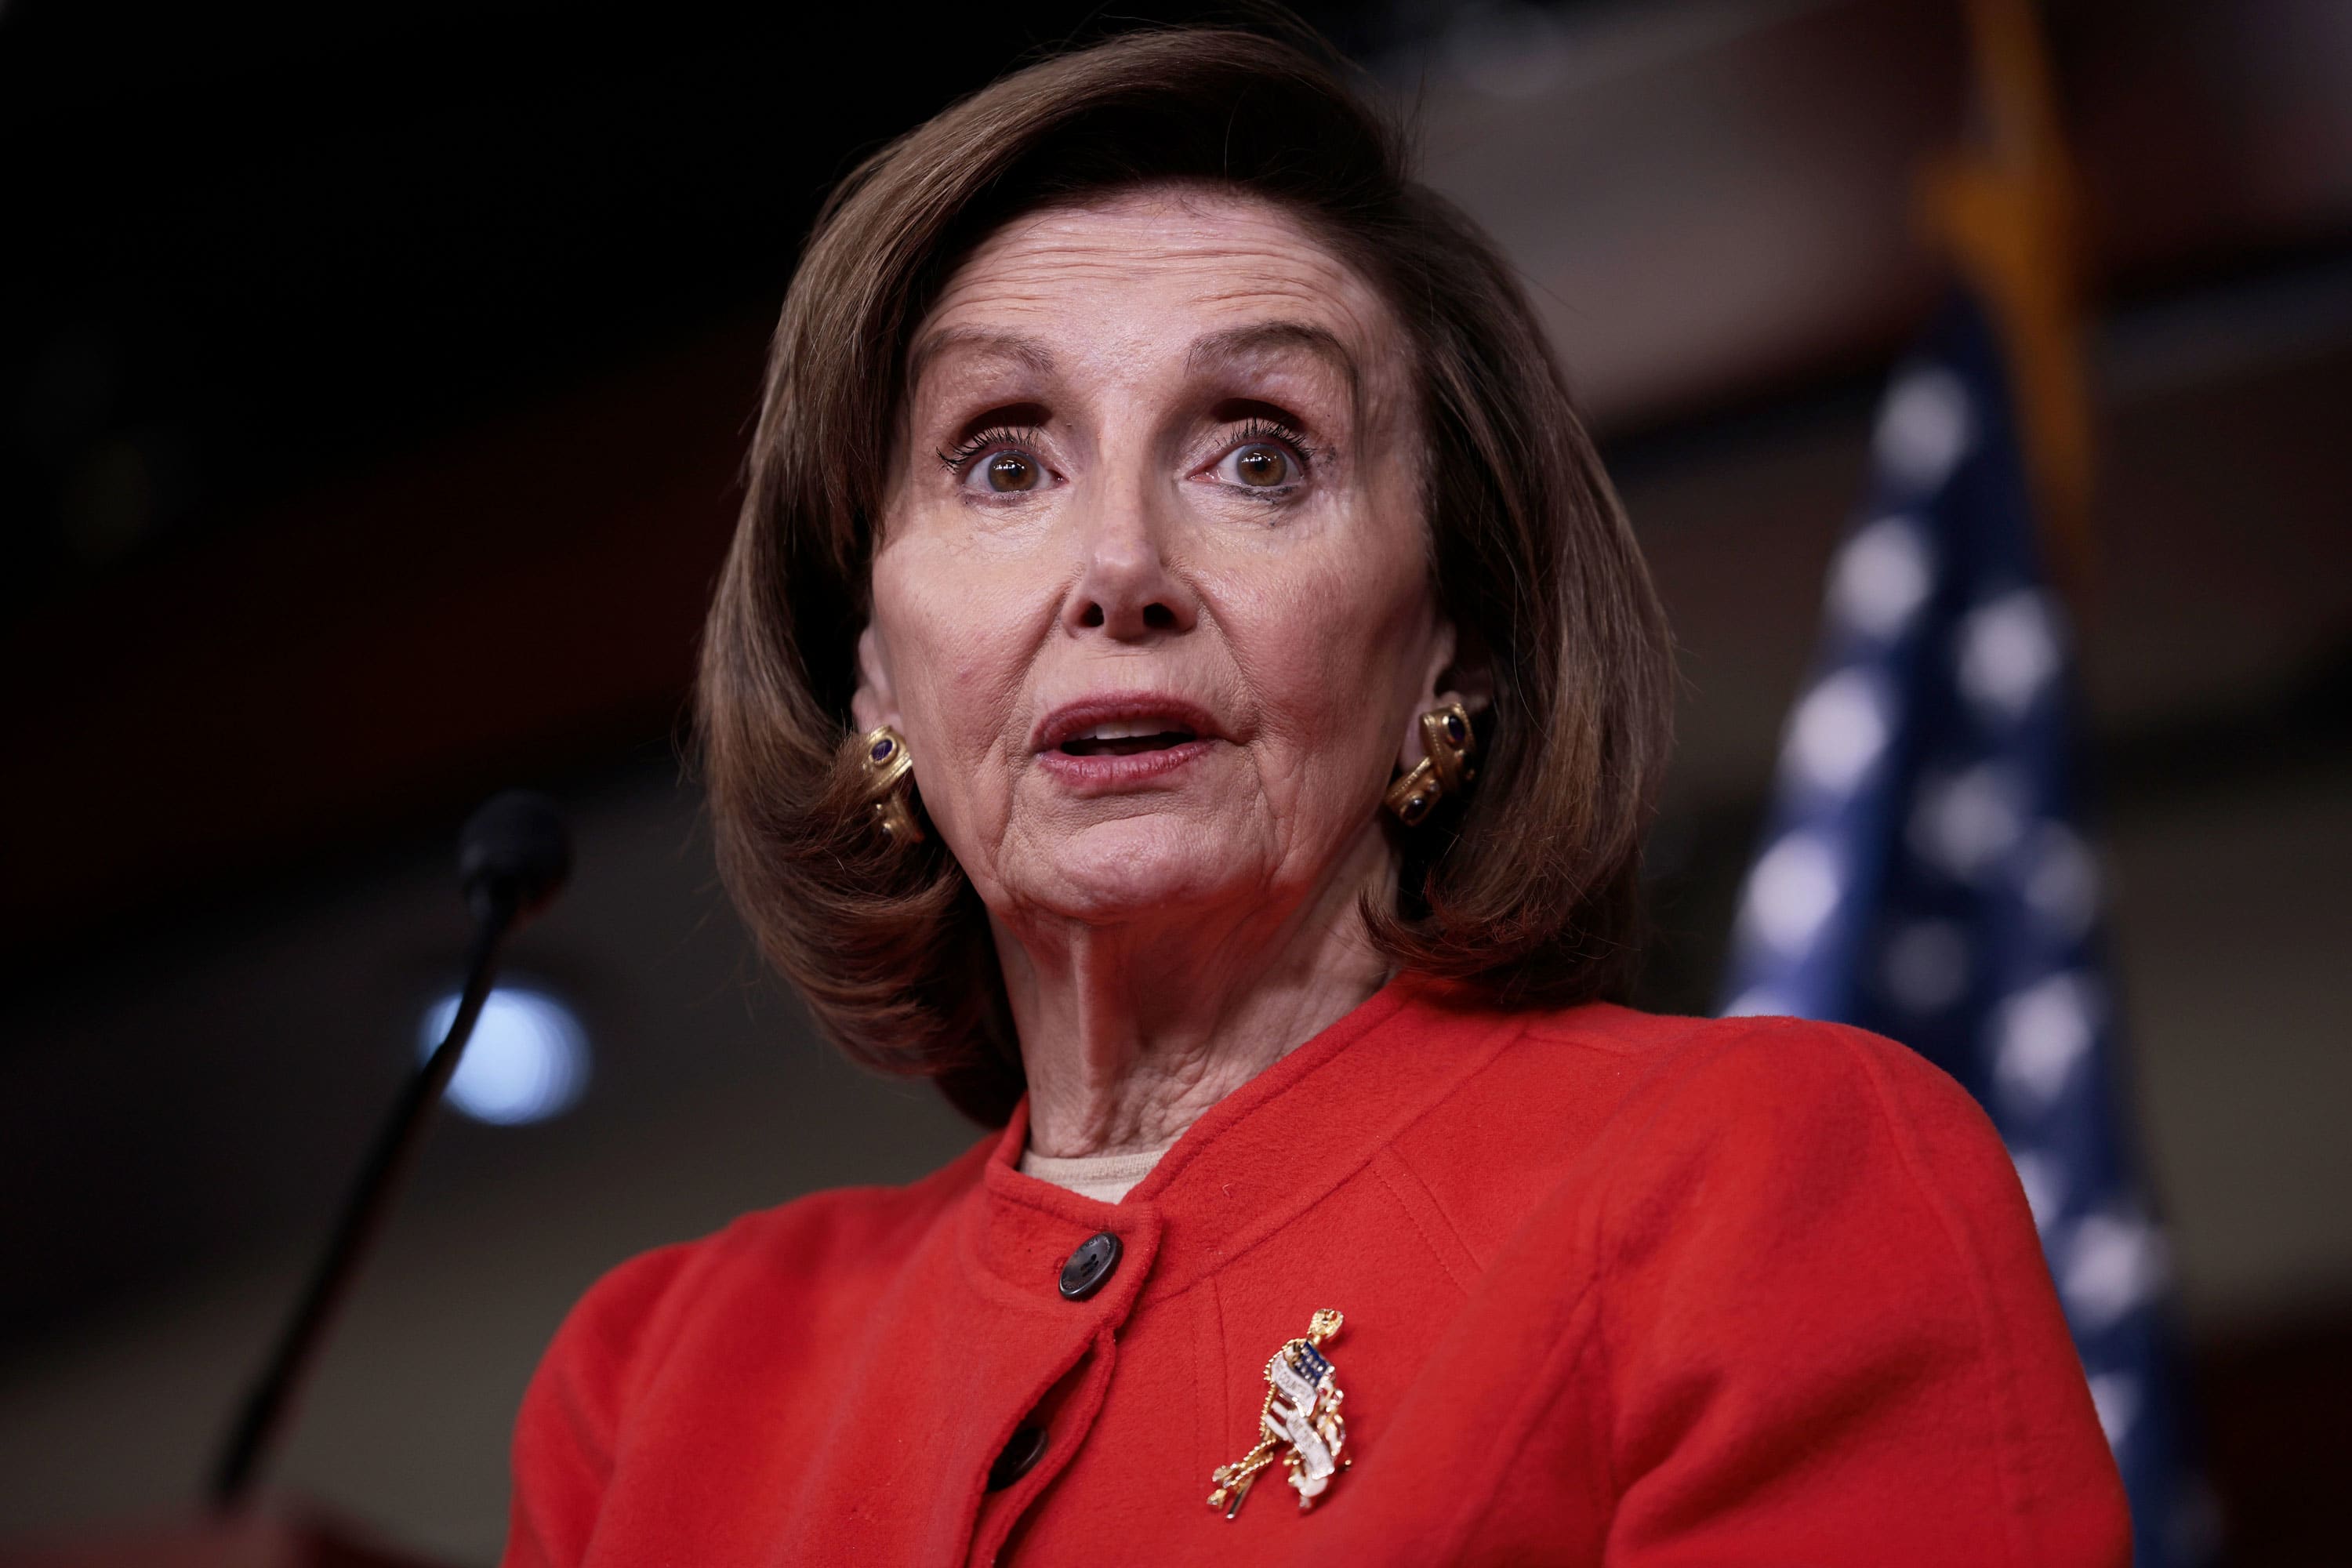 Pelosi says GOP efforts to restrict voting laws is a 'legislative continuation' of Jan. 6